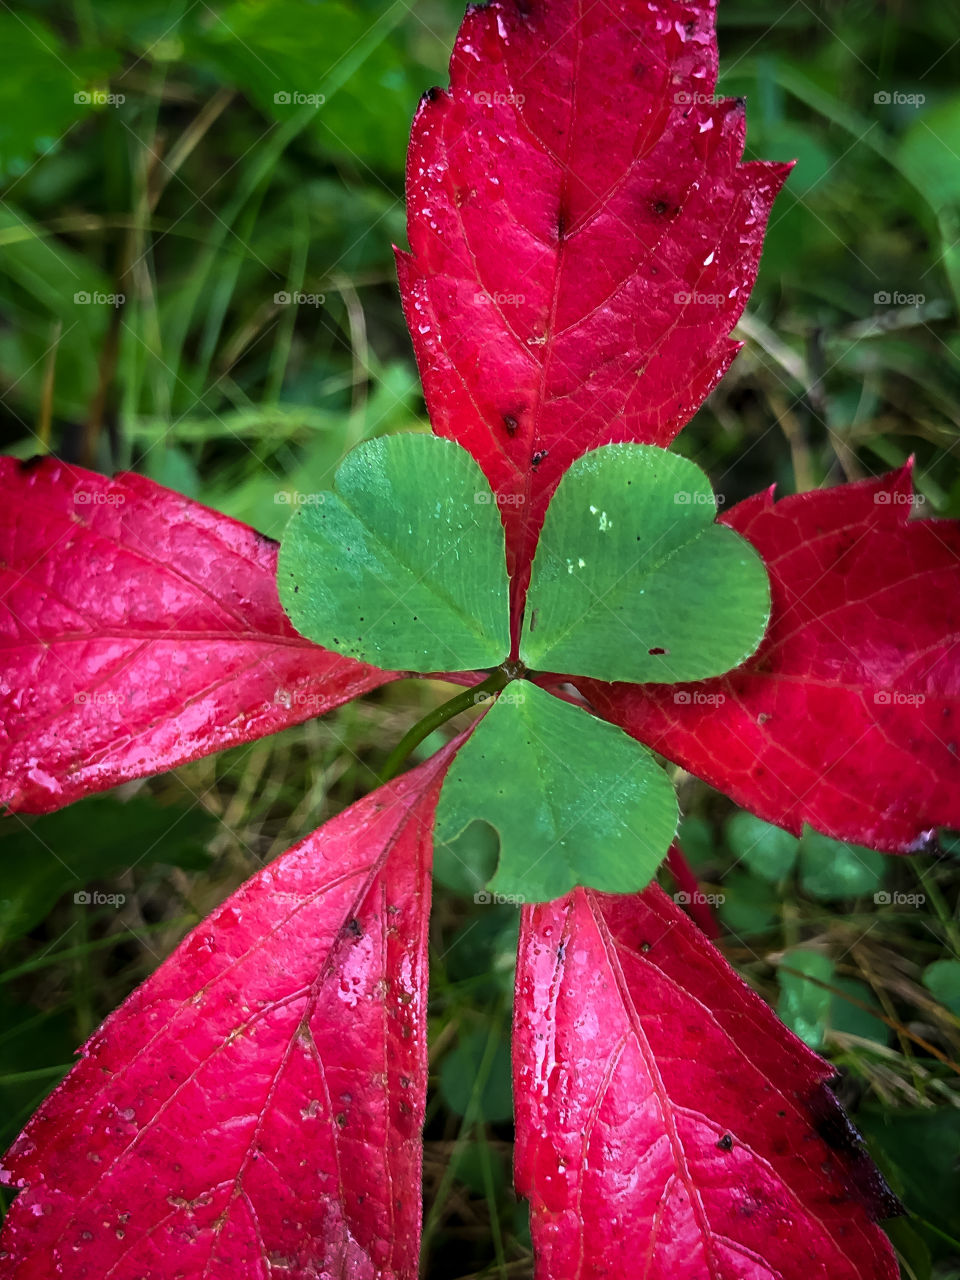 Into each other - 3 shamrocks and 5 red leaves